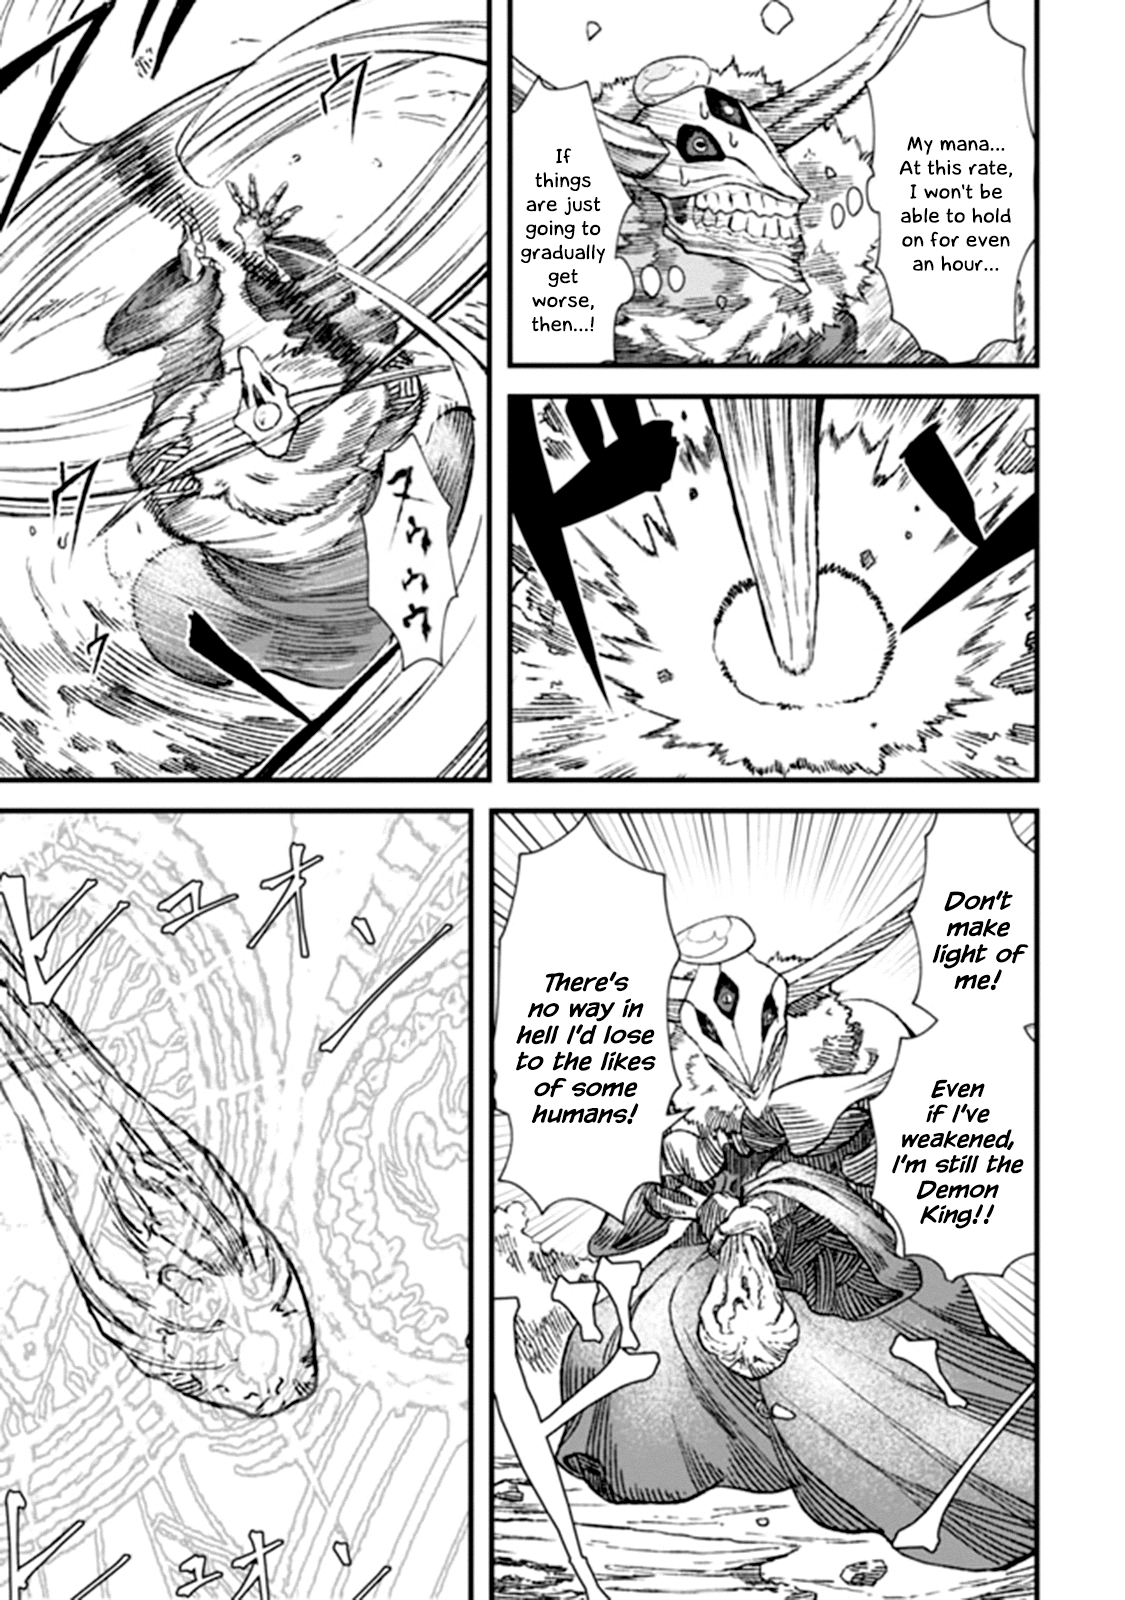 The Comeback Of The Demon King Who Formed A Demon's Guild After Being Vanquished By The Hero - Page 3